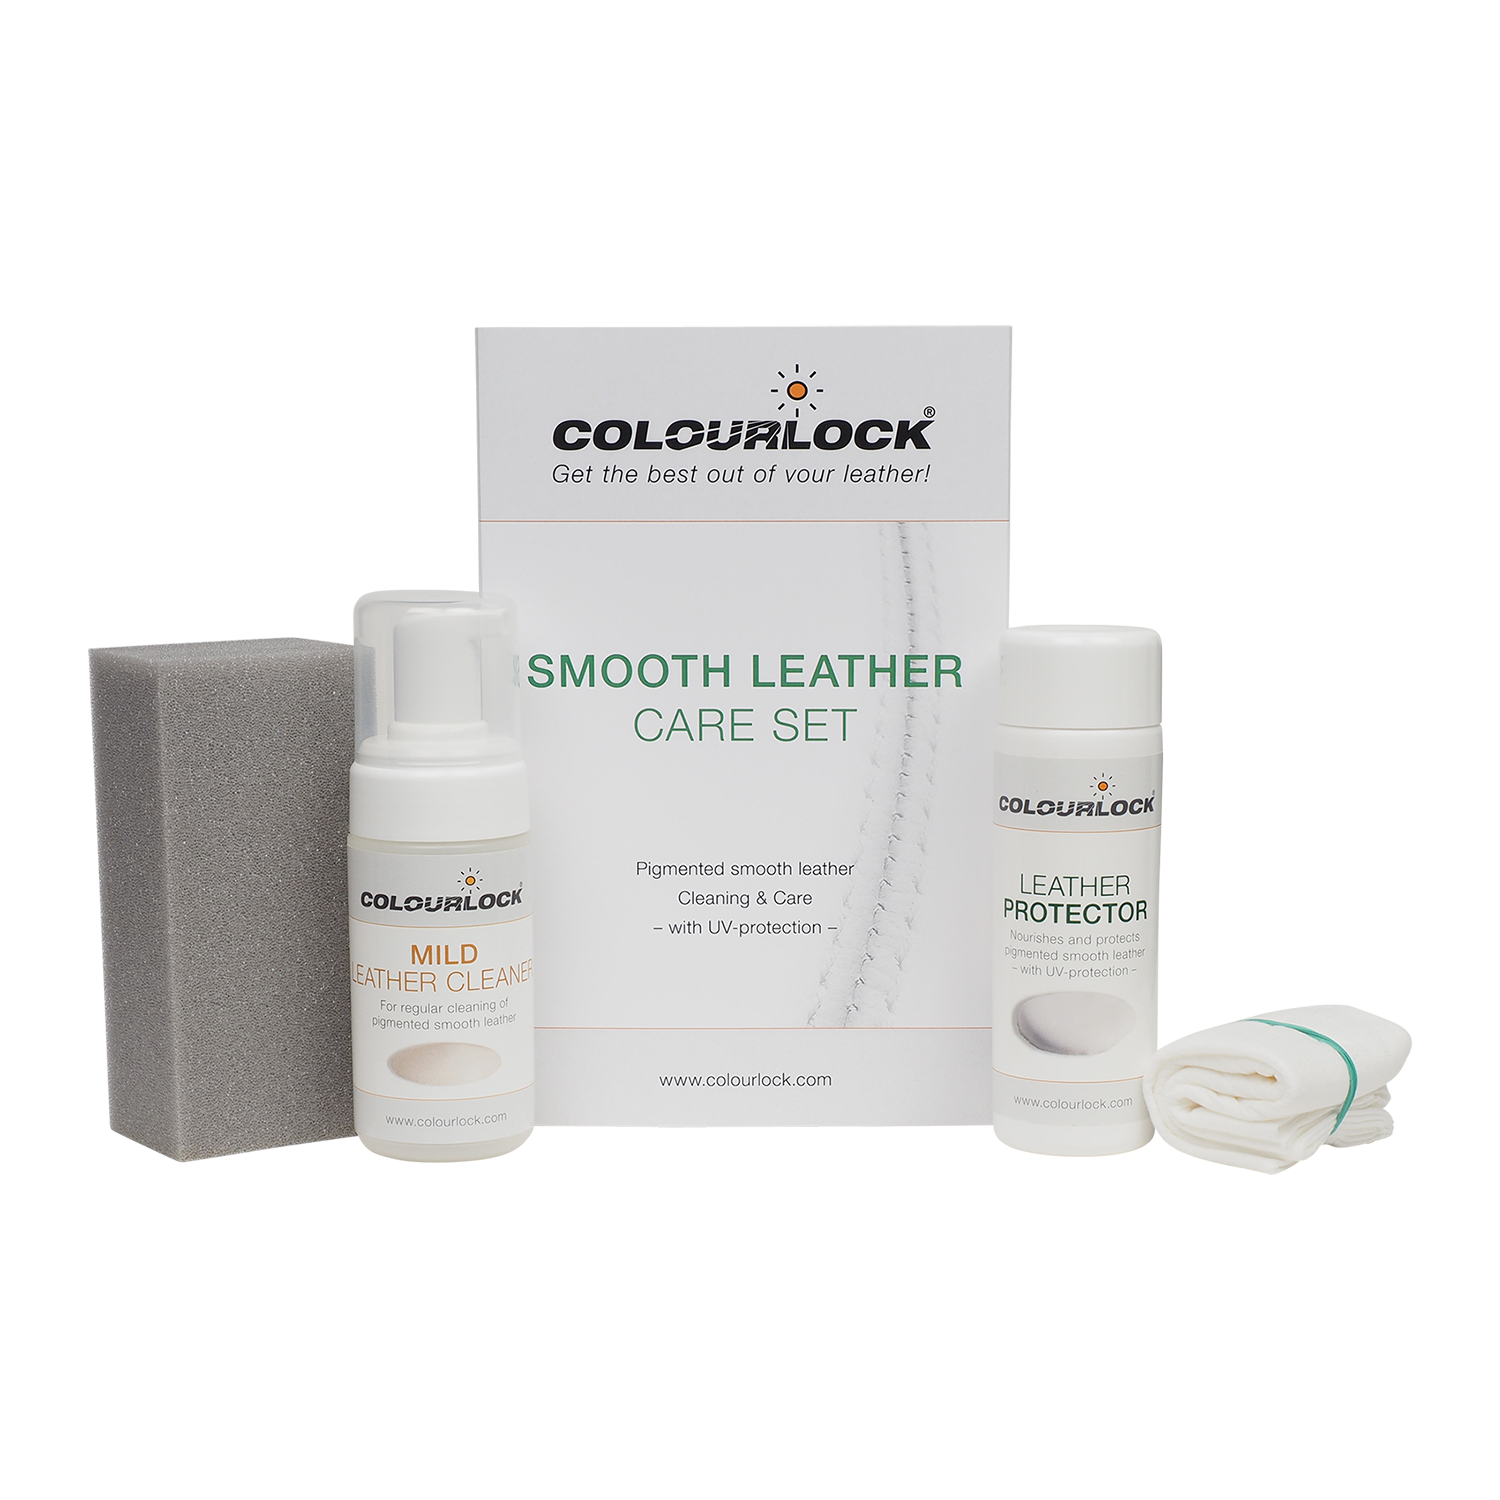 Colourlock Leather Cleaning & Conditioning Kit with "Strong" Leather Cleaner